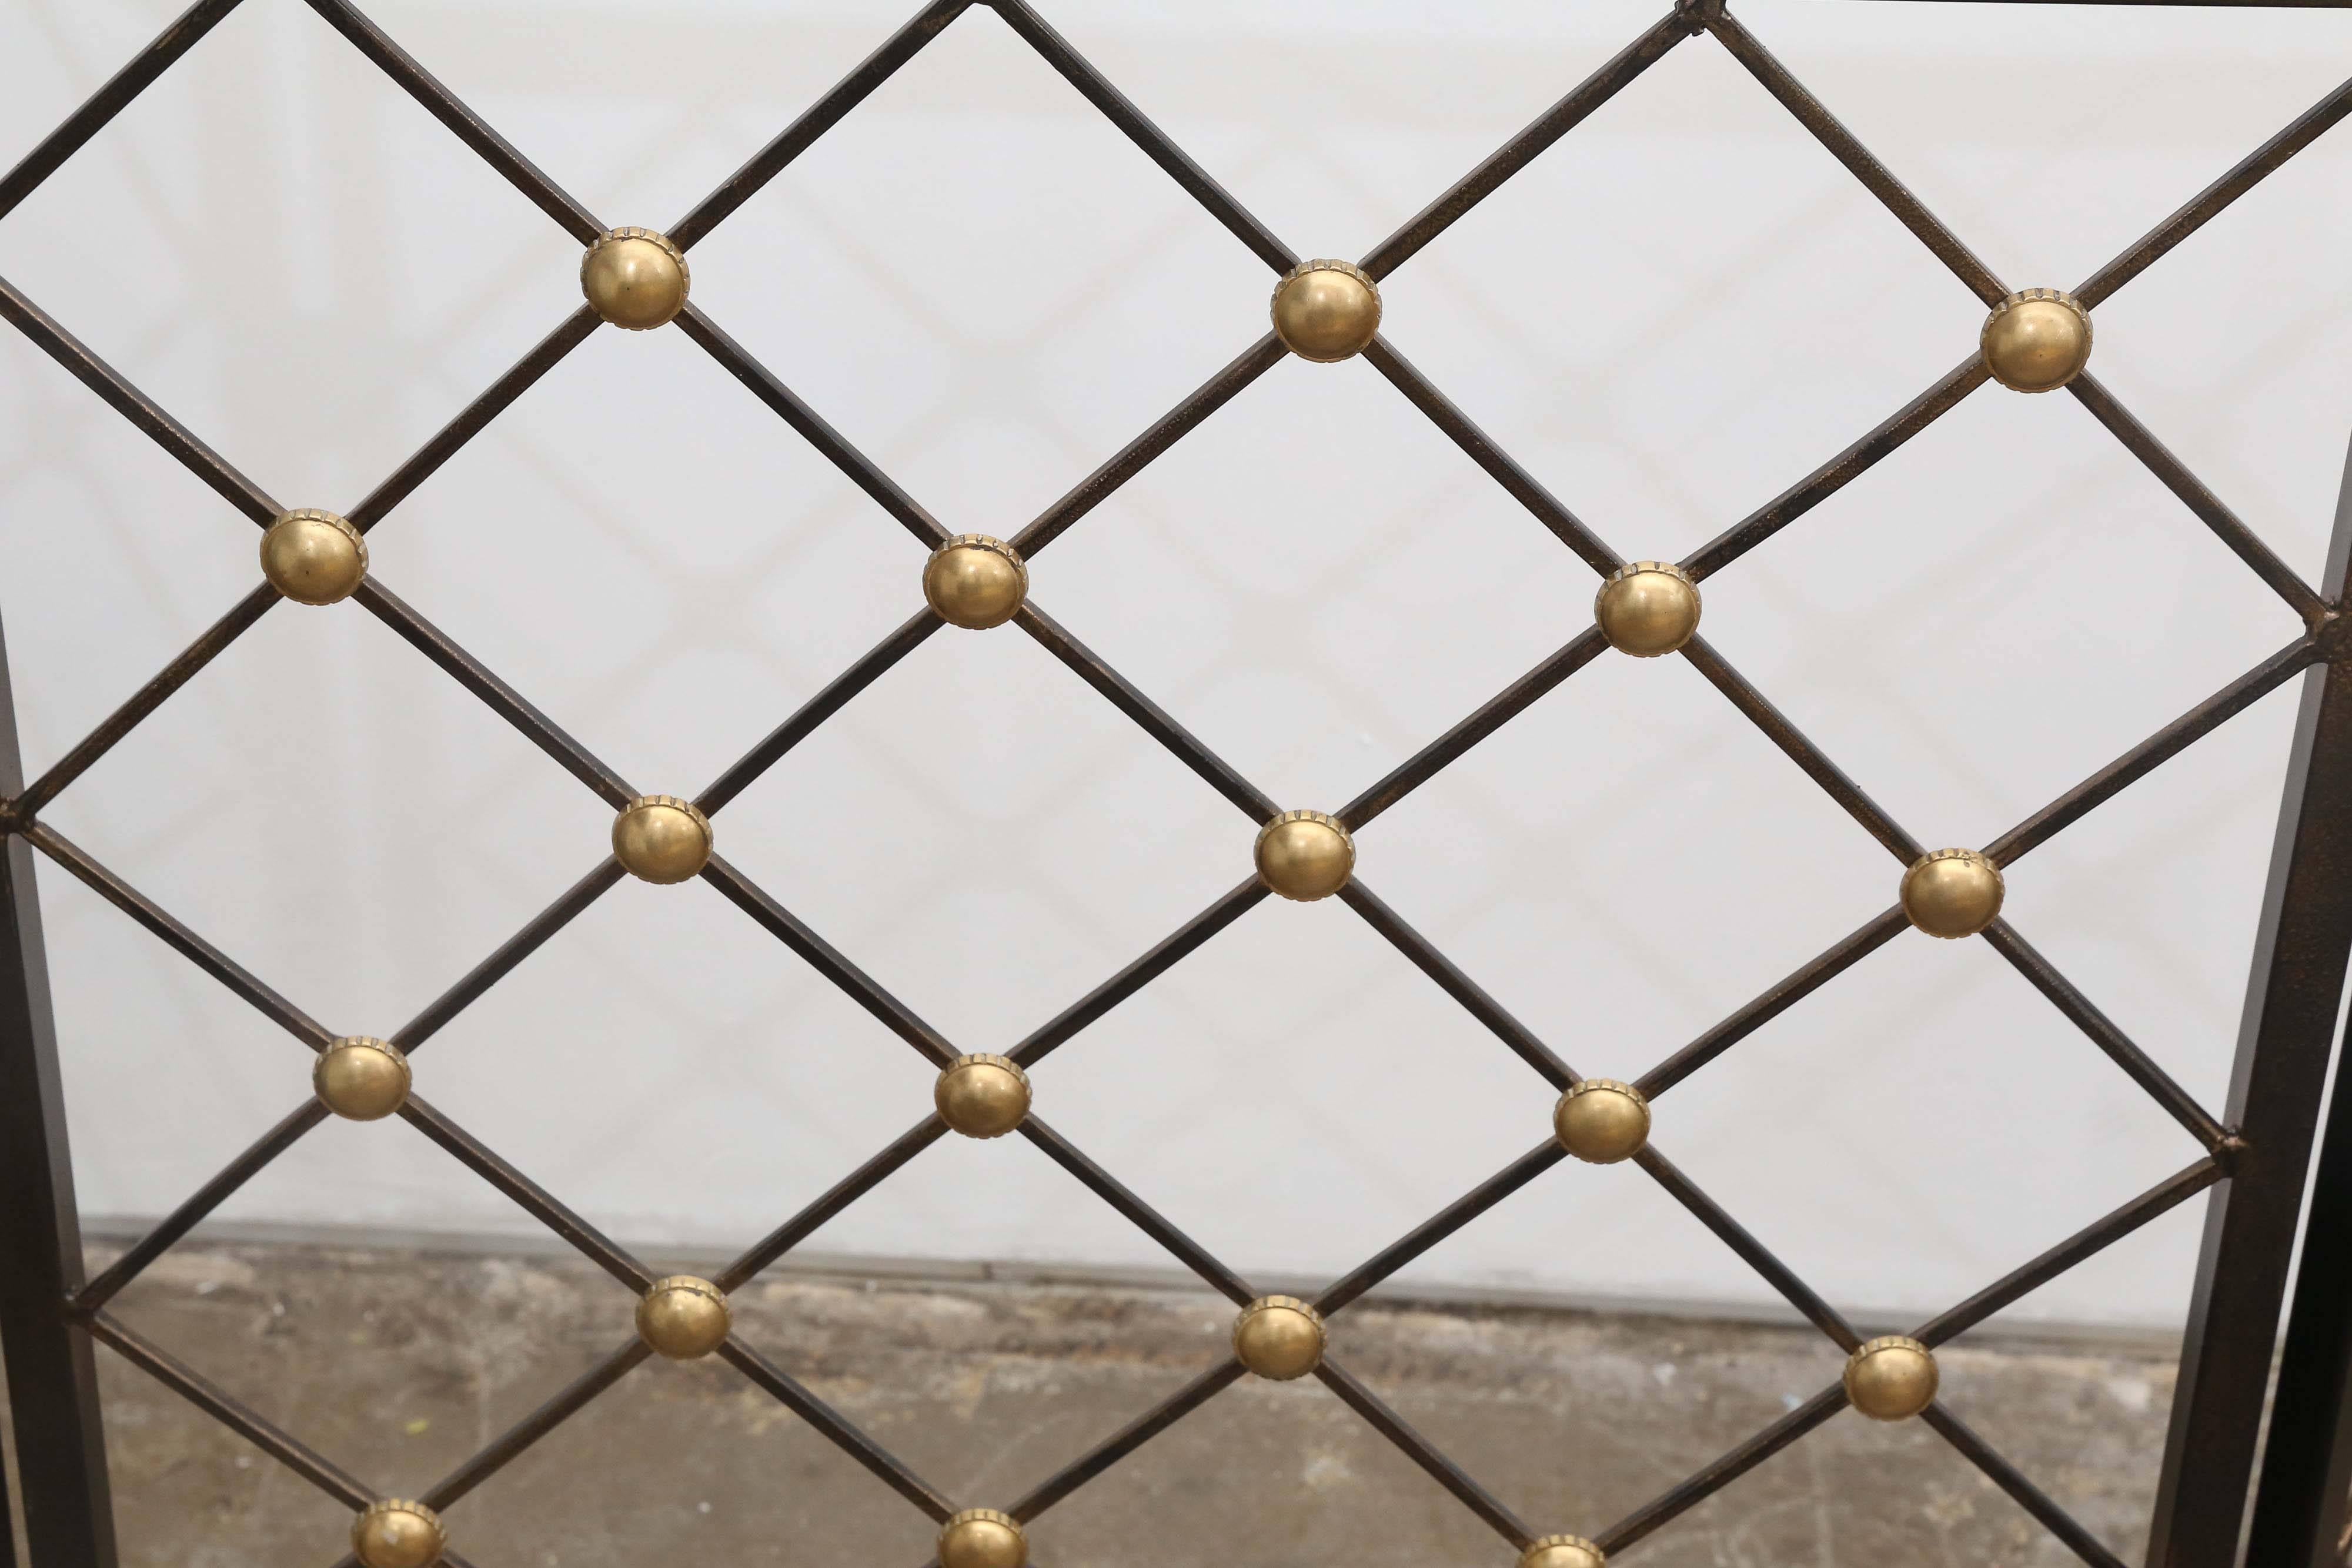 This elegant lattice pattern three panel folding fire screen in classic black patinated wrought iron punctuated by polished brass bosses exudes the refinement and restraint found in the works of classically trained Mid-century modern designers such